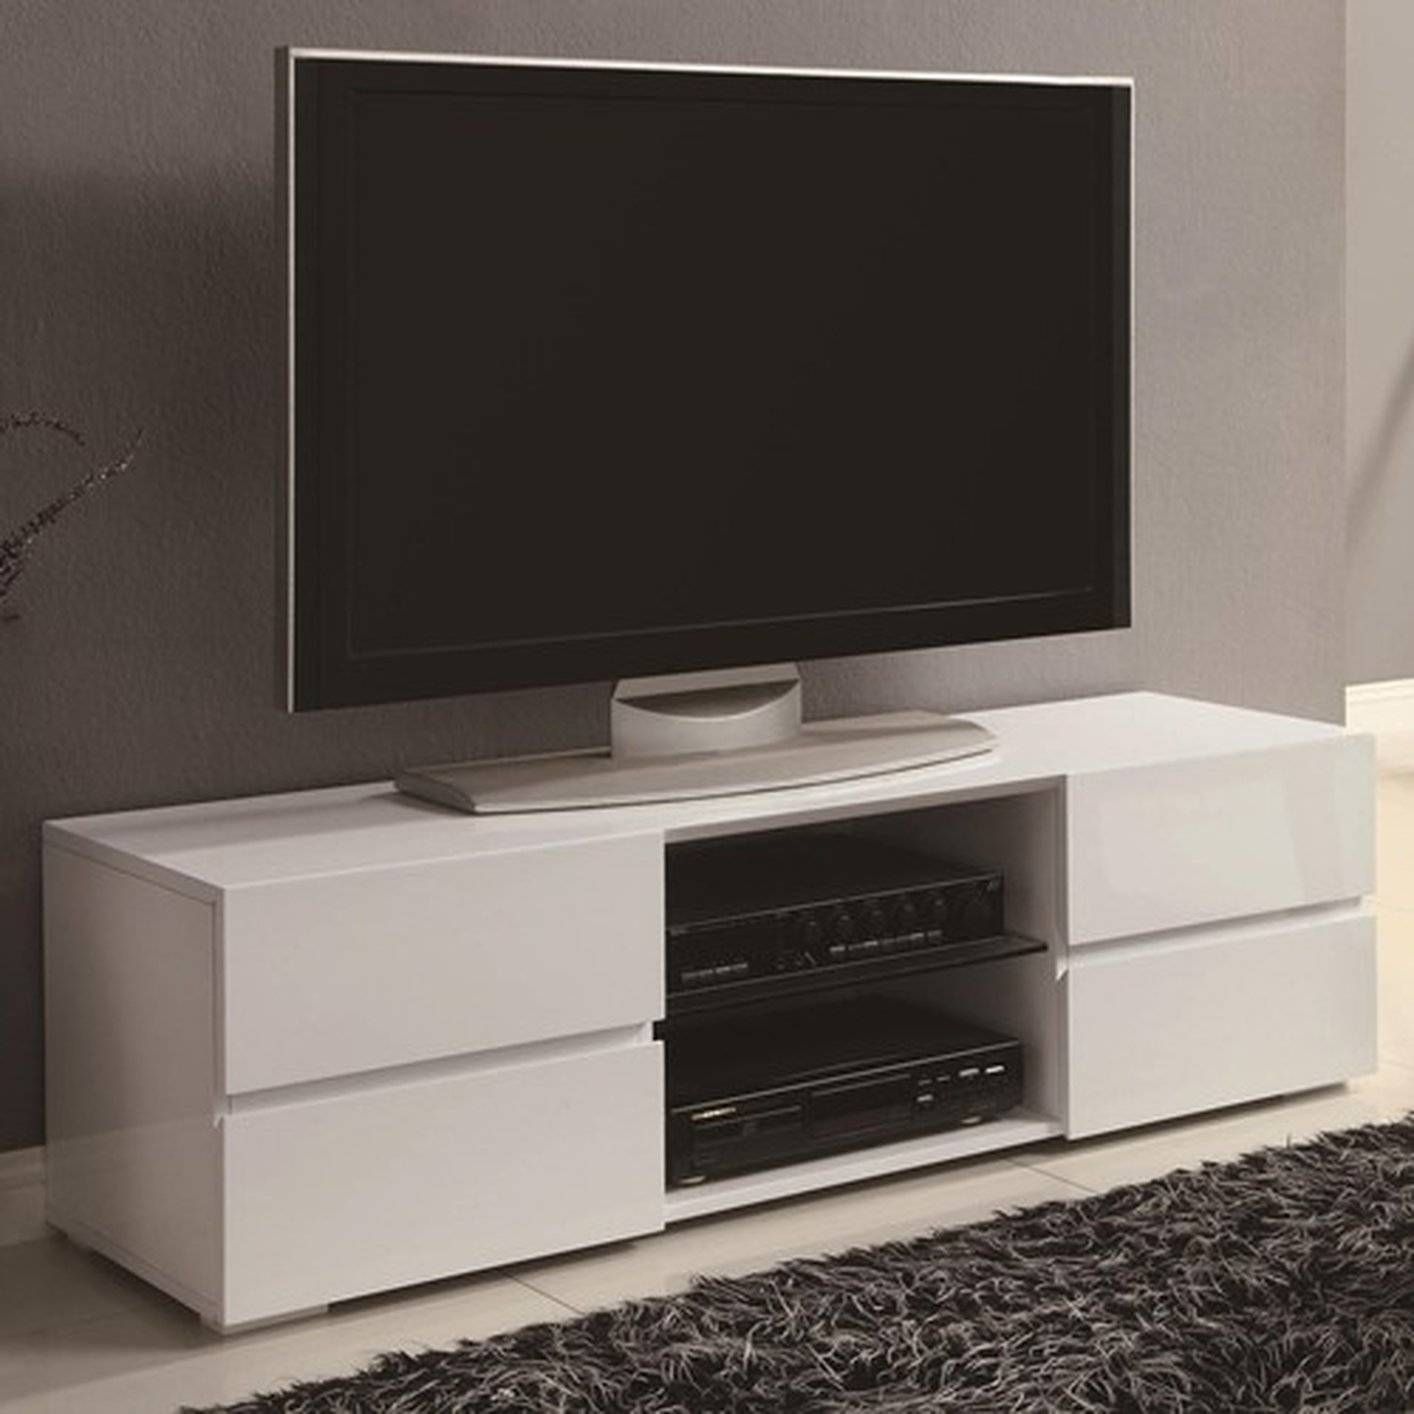 White Wood Tv Stand – Steal A Sofa Furniture Outlet Los Angeles Ca Throughout White And Wood Tv Stands (View 1 of 15)